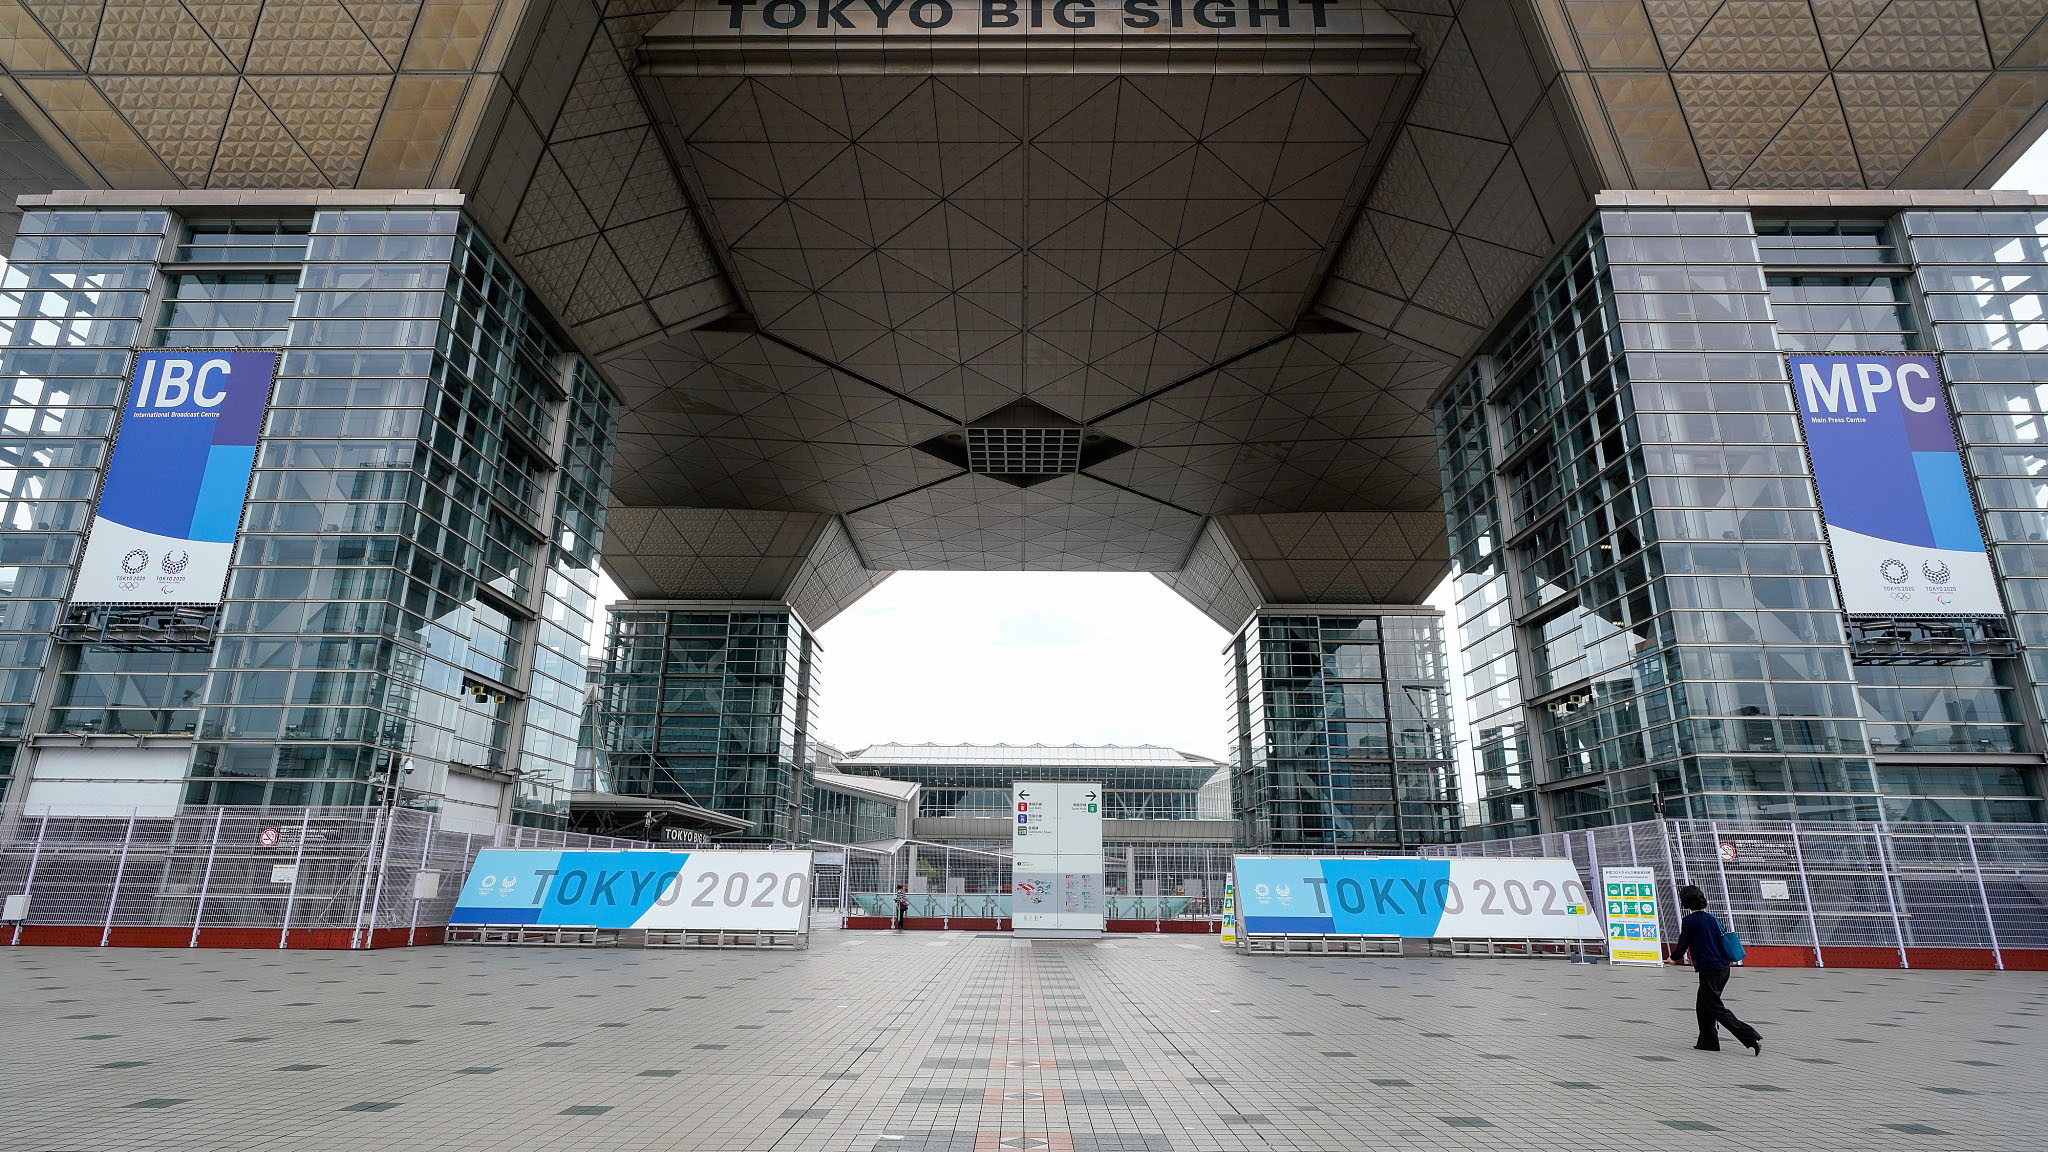 The IBC for the re-arranged 2020 Olympic and Paralympic Games was located at the Tokyo Big Sight ©OBS